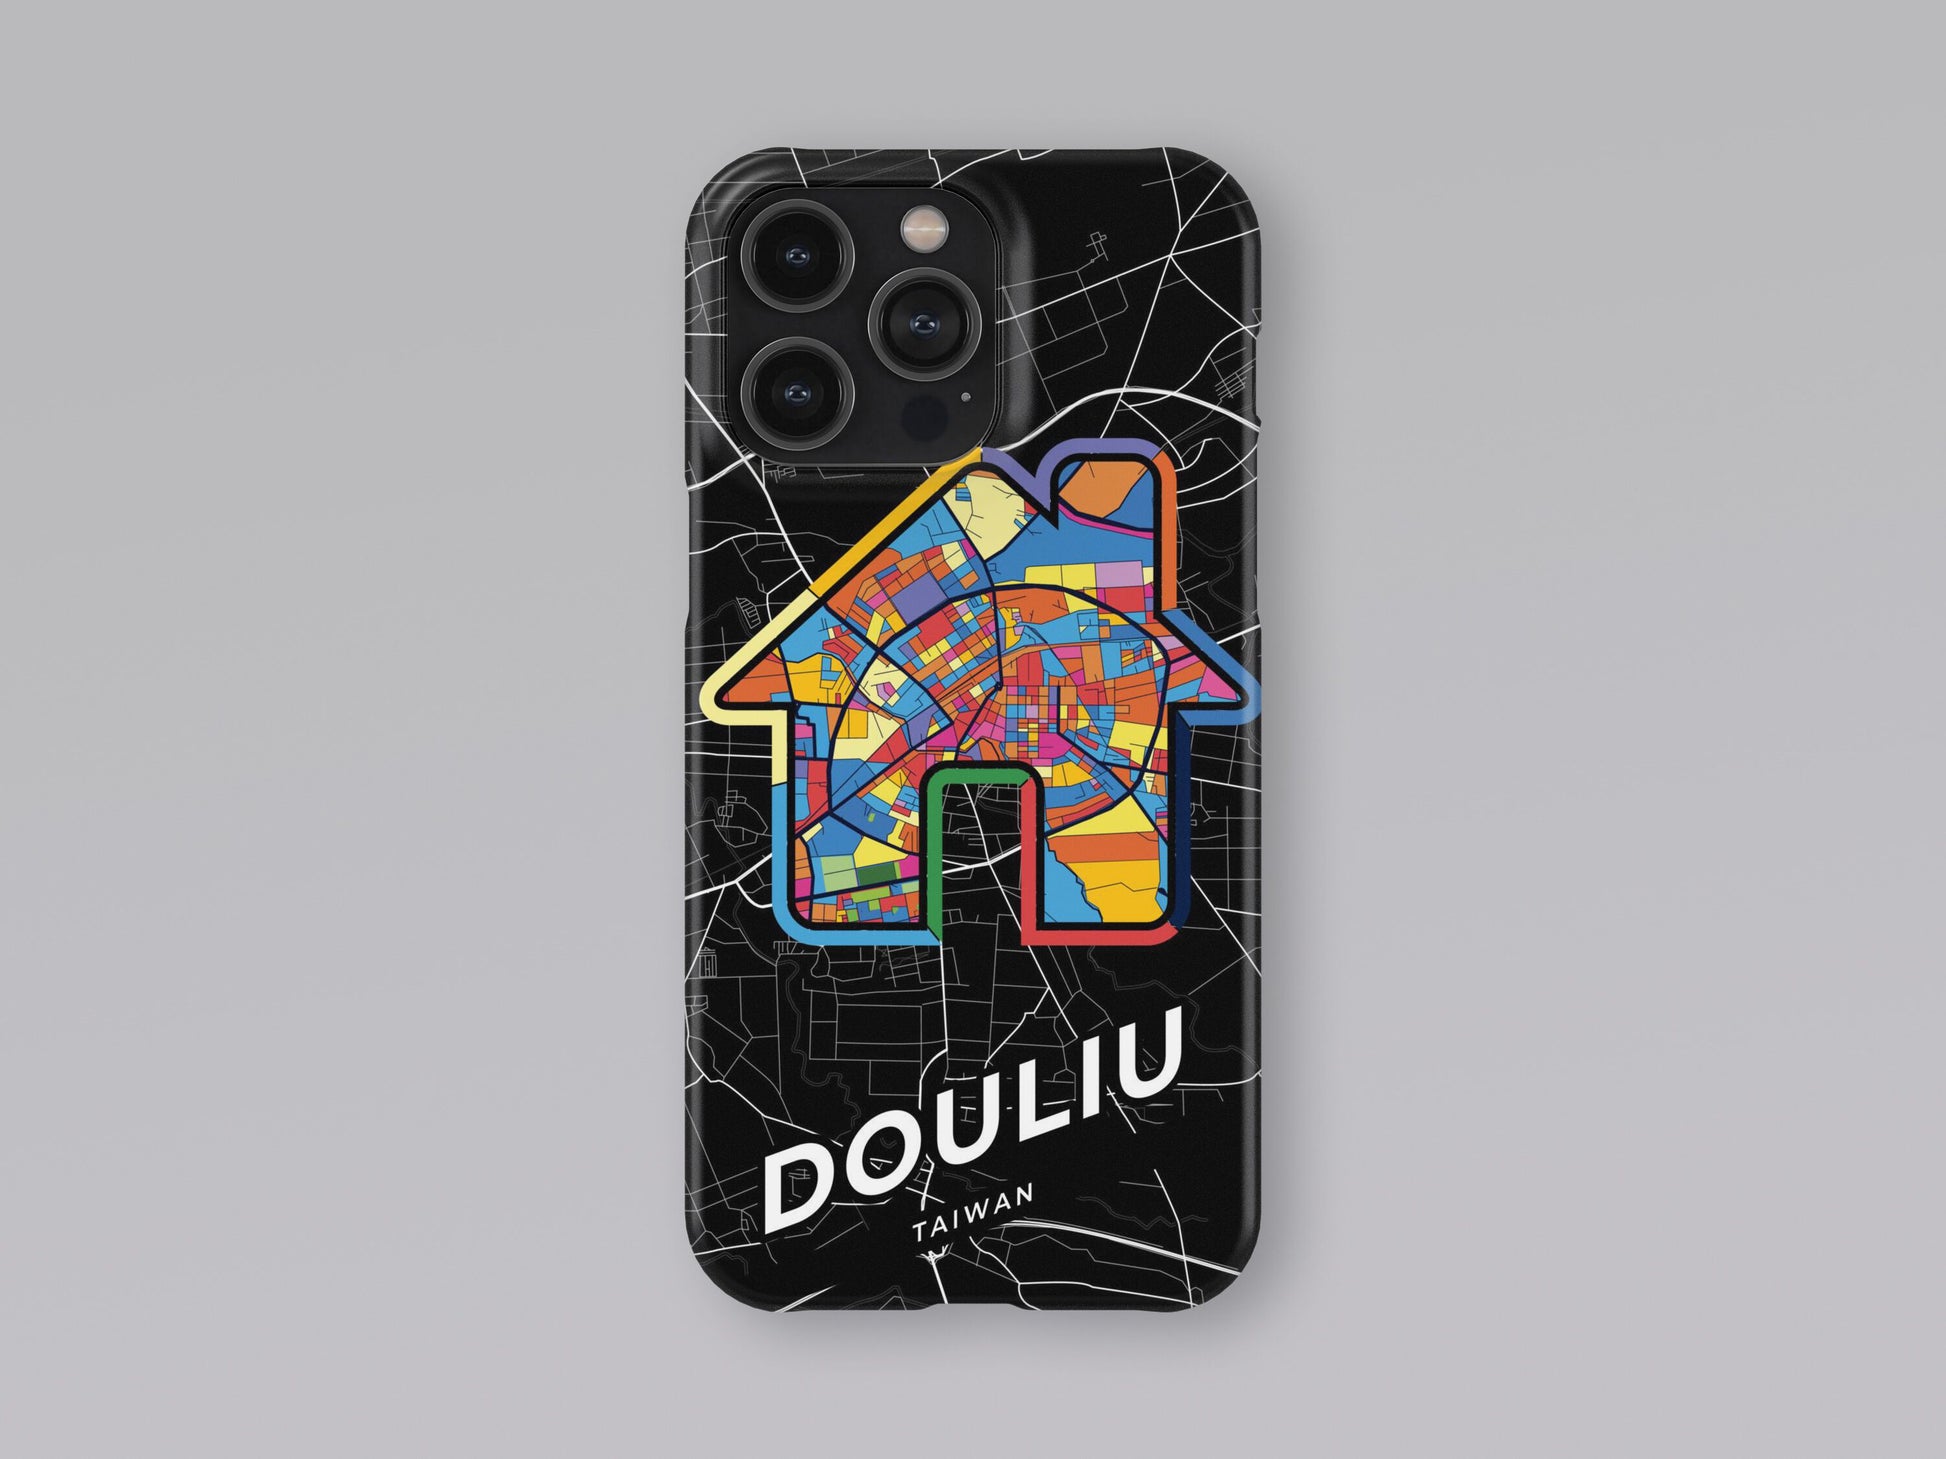 Douliu Taiwan slim phone case with colorful icon. Birthday, wedding or housewarming gift. Couple match cases. 3